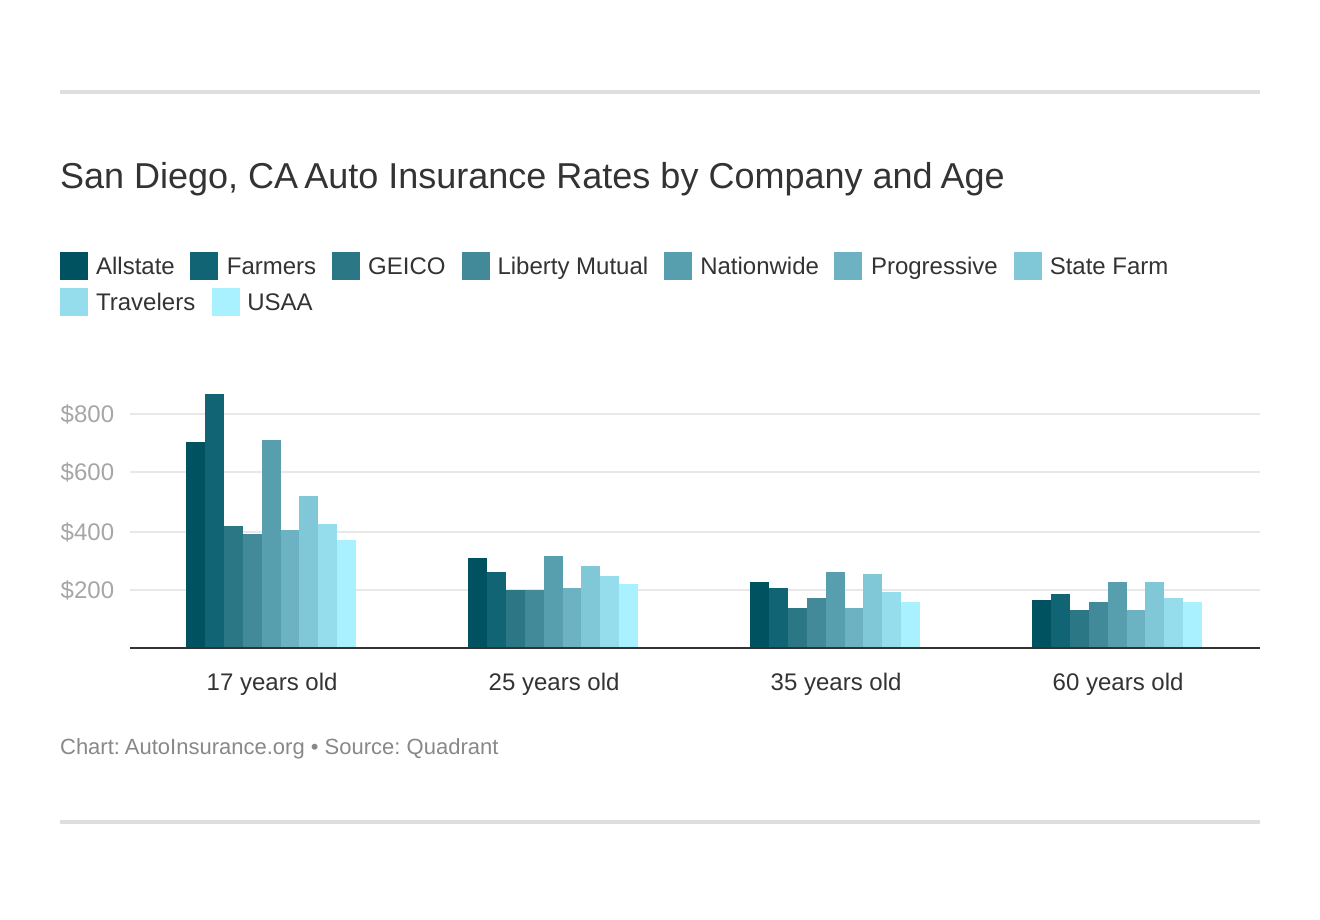 San Diego, CA Auto Insurance Rates by Company and Age